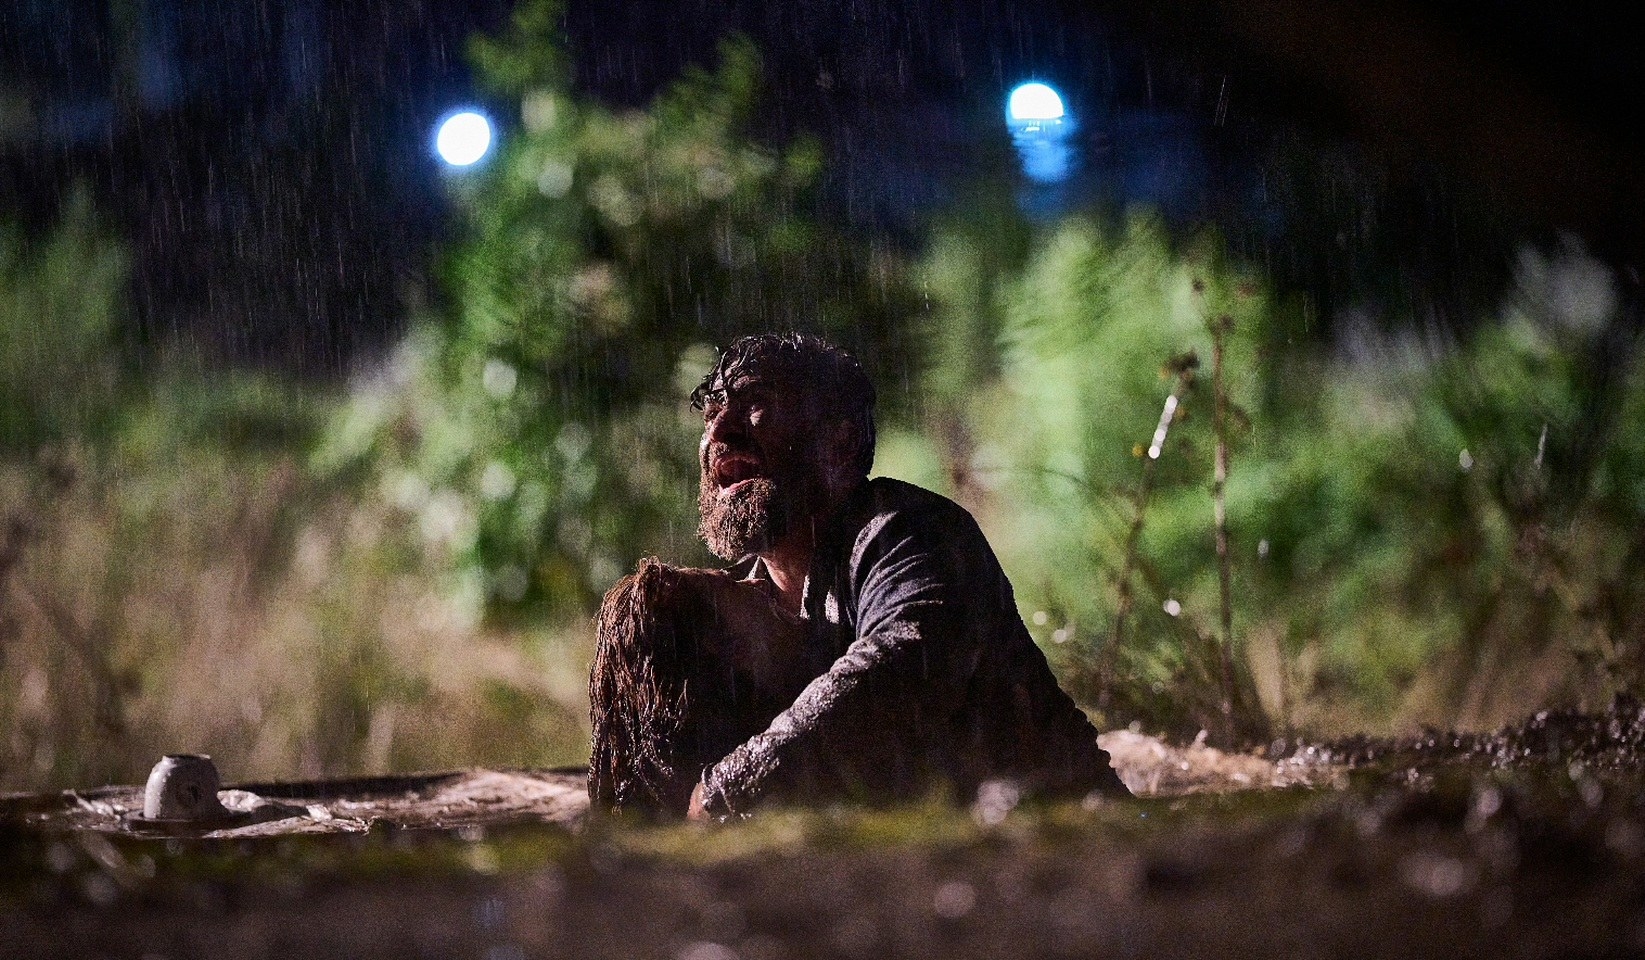 A crying and muddy man attempts to retrieve his wife from a living burial